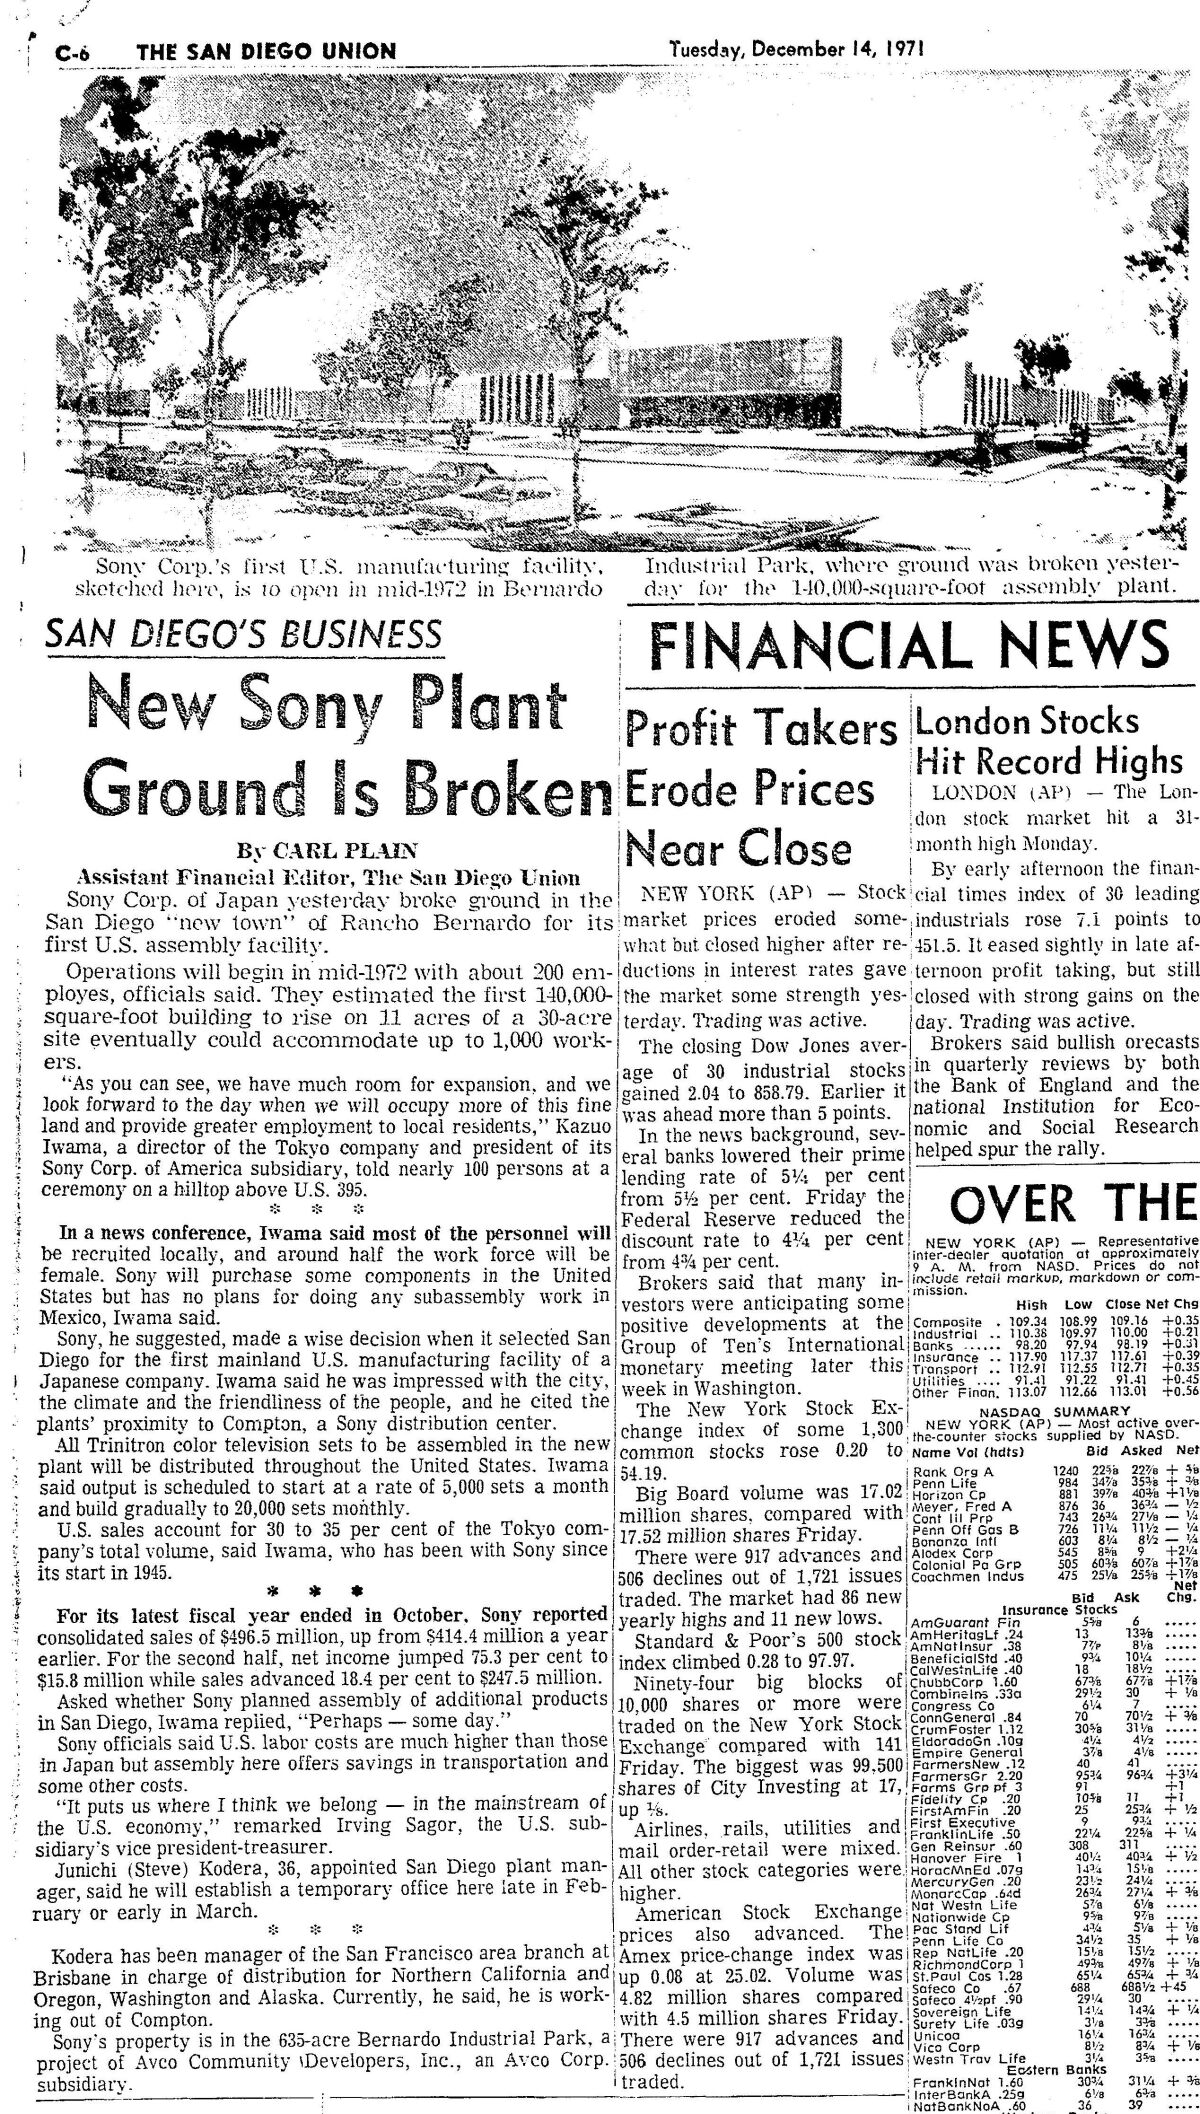 "New Sony Plant Ground Is Broken" article published in The San Diego Union, Dec. 14, 1971.